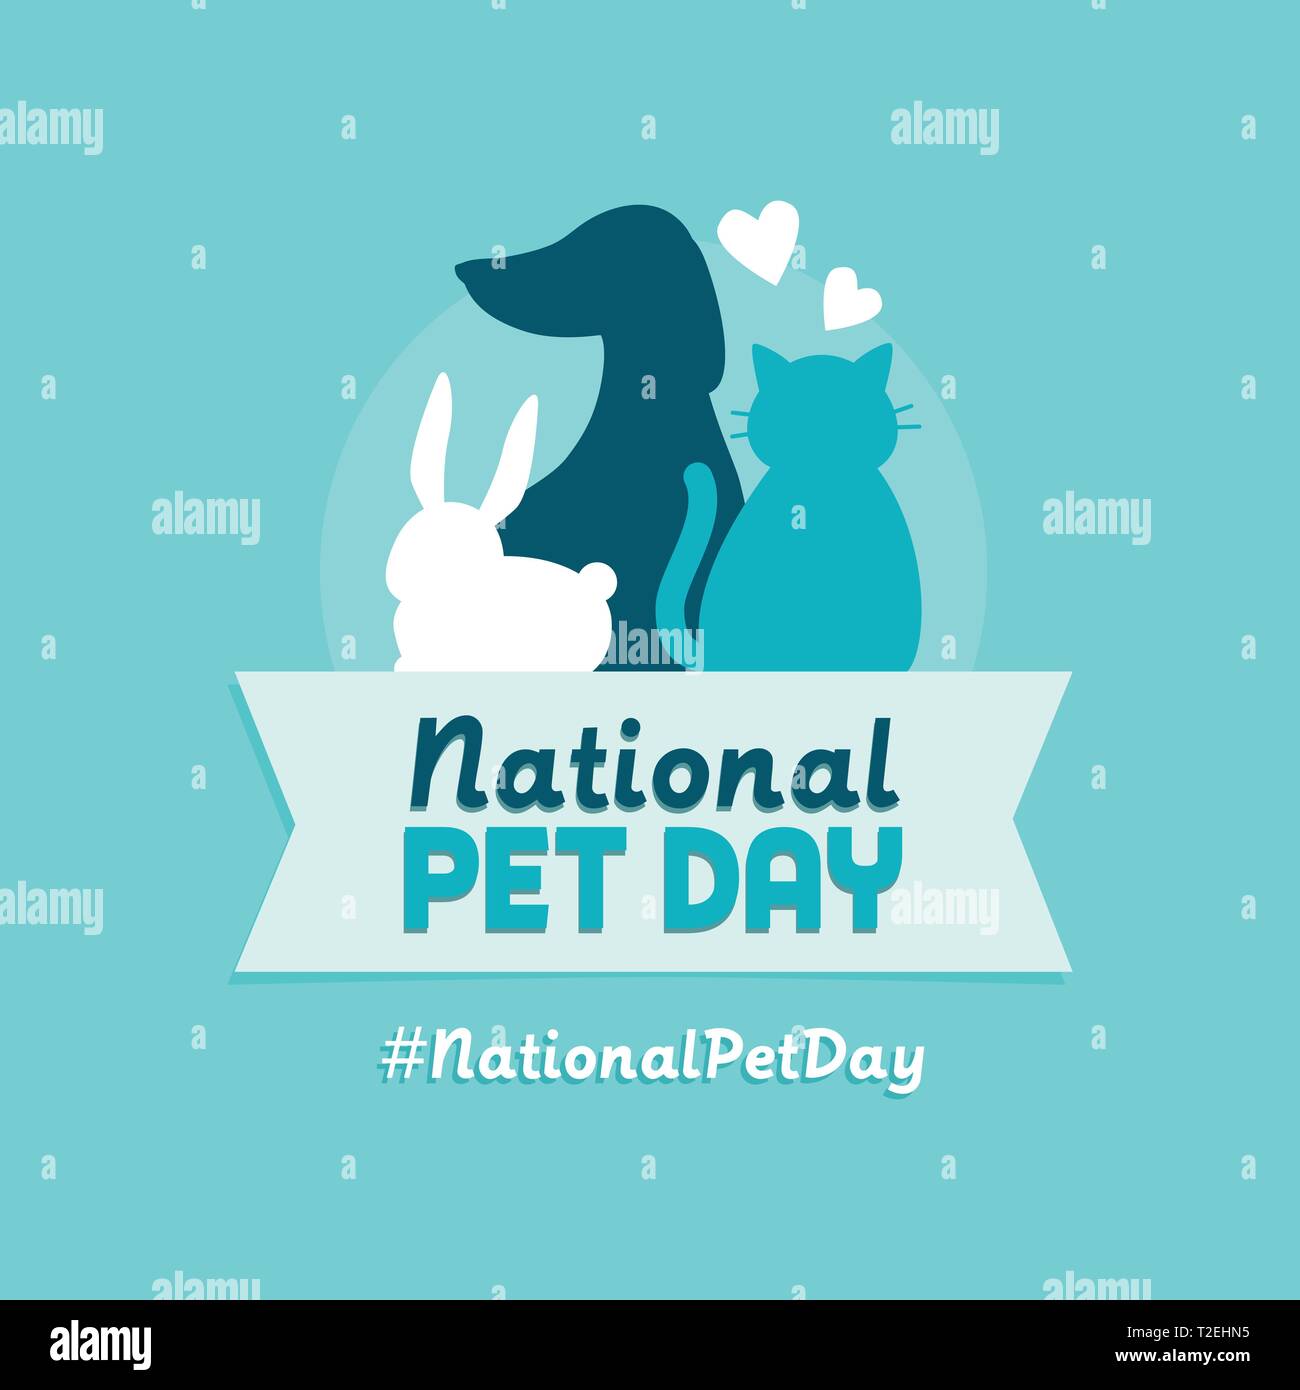 National pet day holiday social media post and card design with cute pets Stock Vector